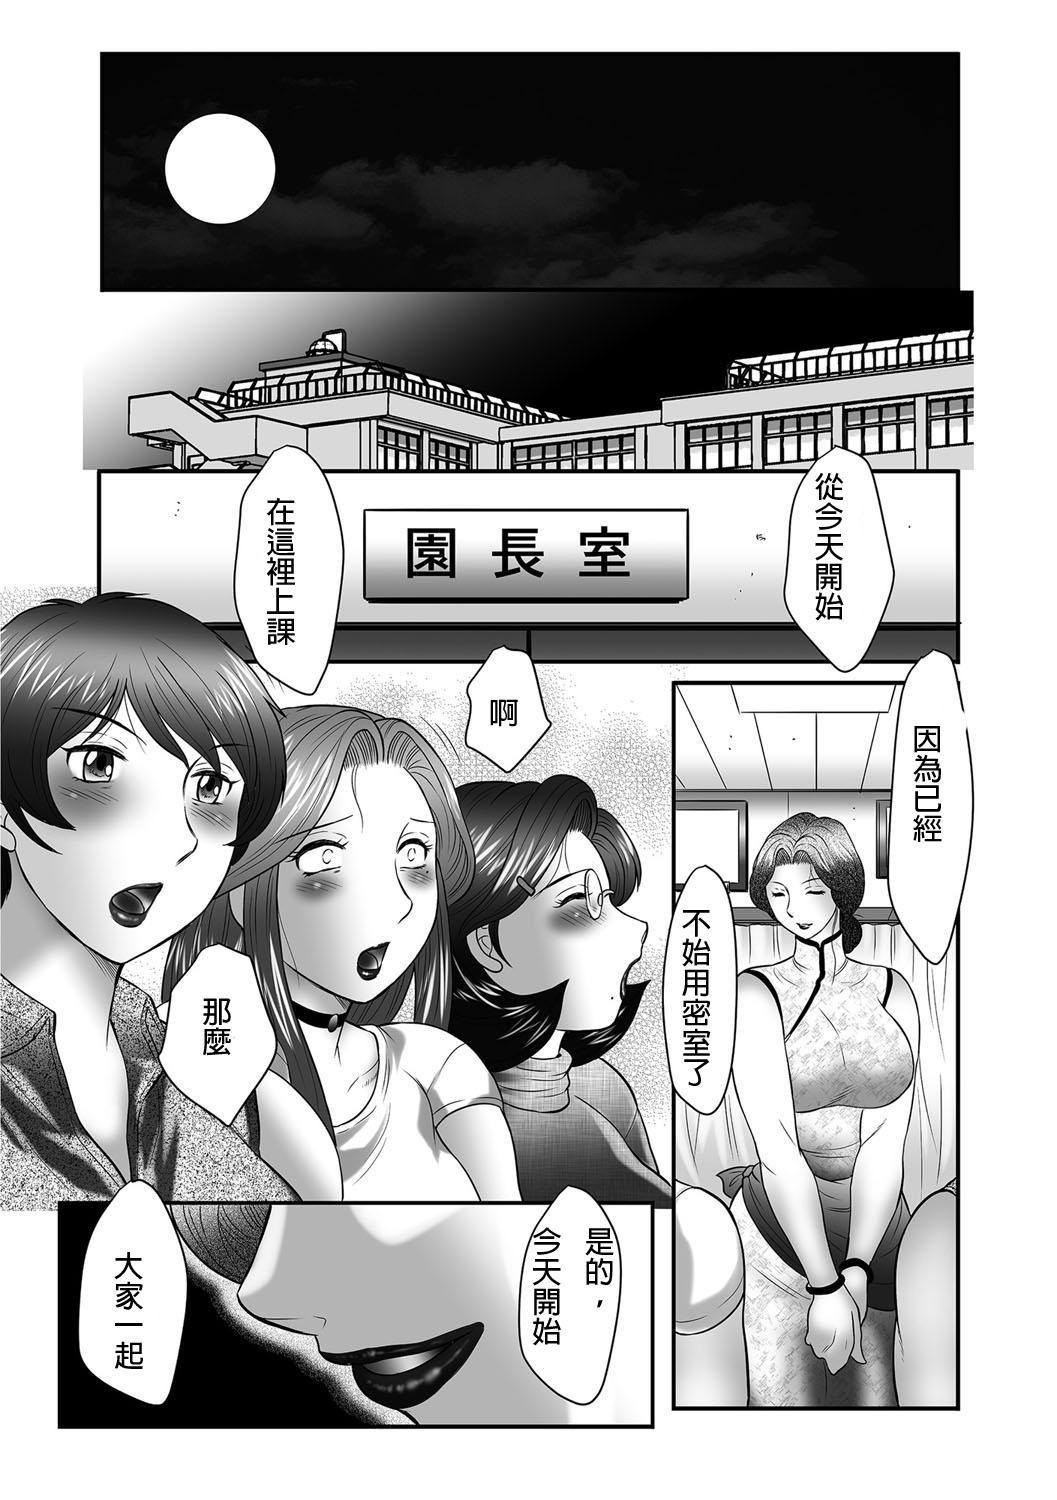 [Fuusen Club] Boshi no Susume - The advice of the mother and child Ch. 9-10 16